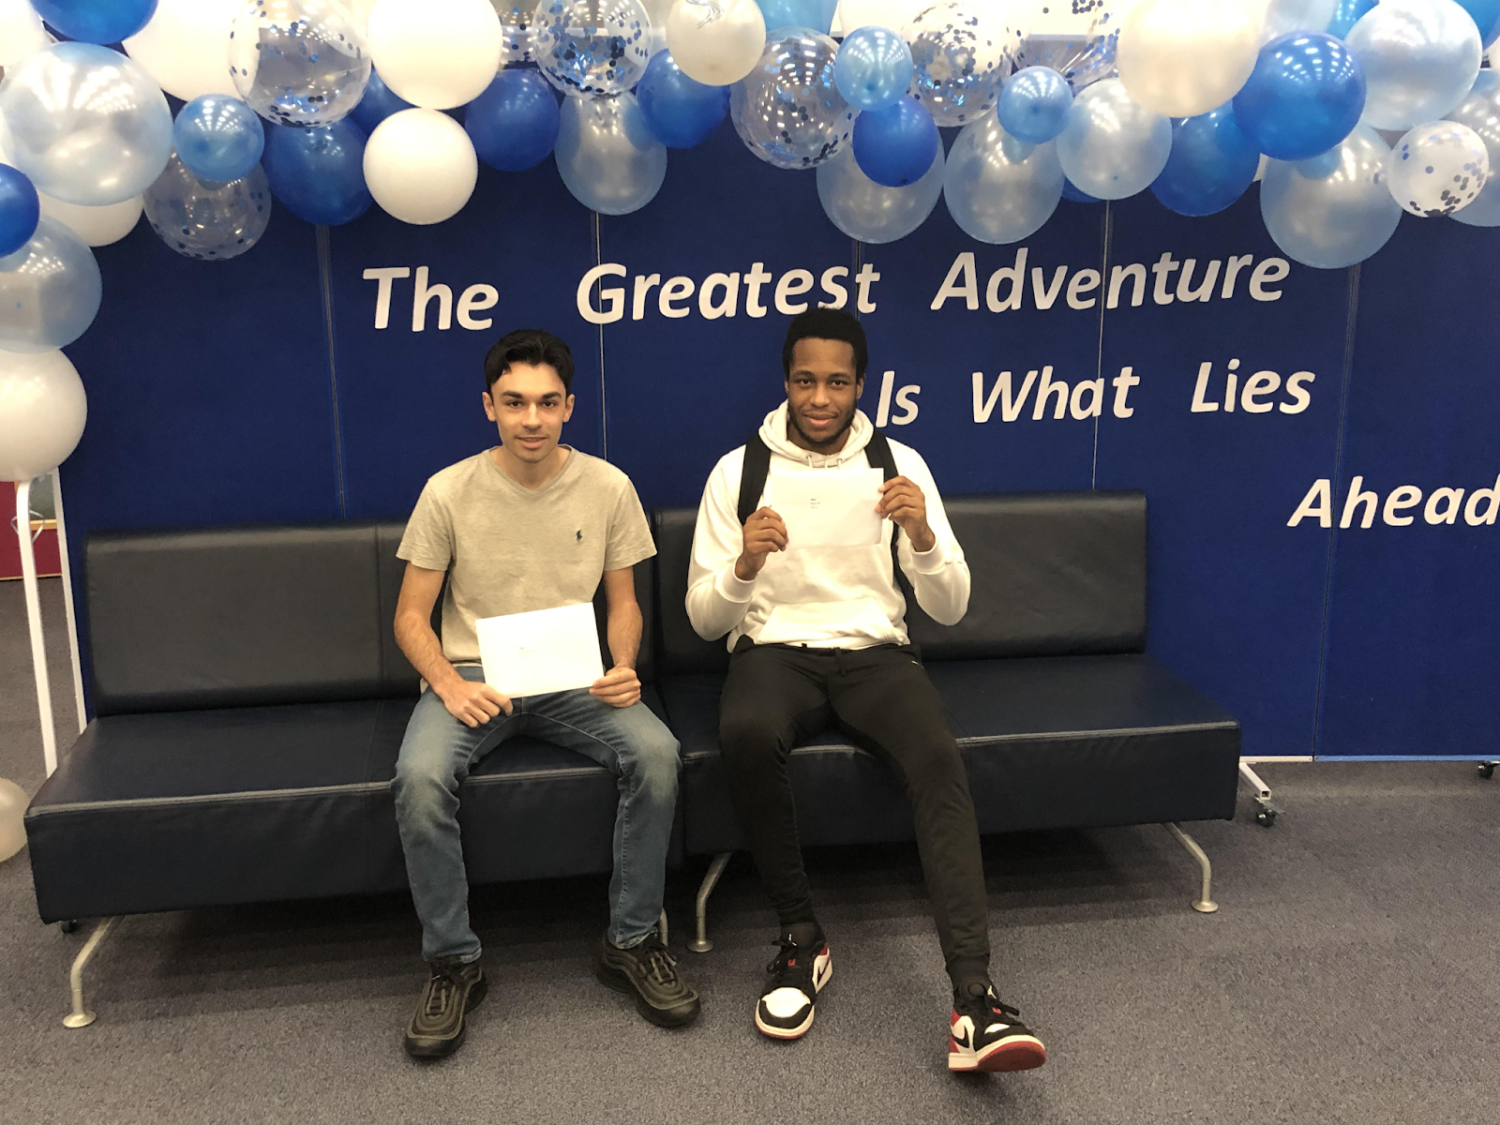 Two Post-16 students are pictured sitting next to each other on a bench, holding their A Level Results sheets in their hands and smiling for the camera.